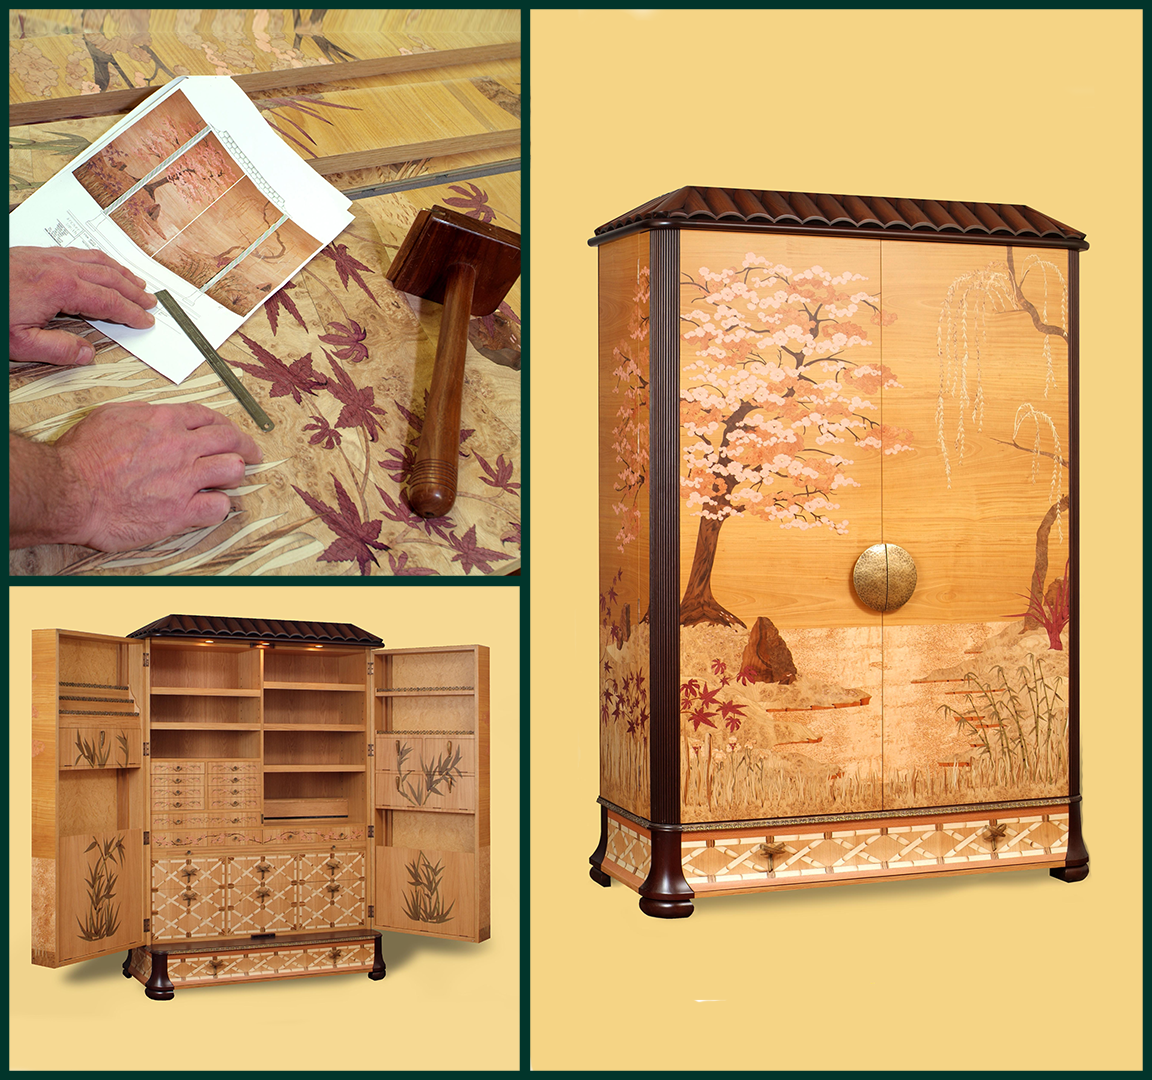 Collection of craft images - Wardrobe